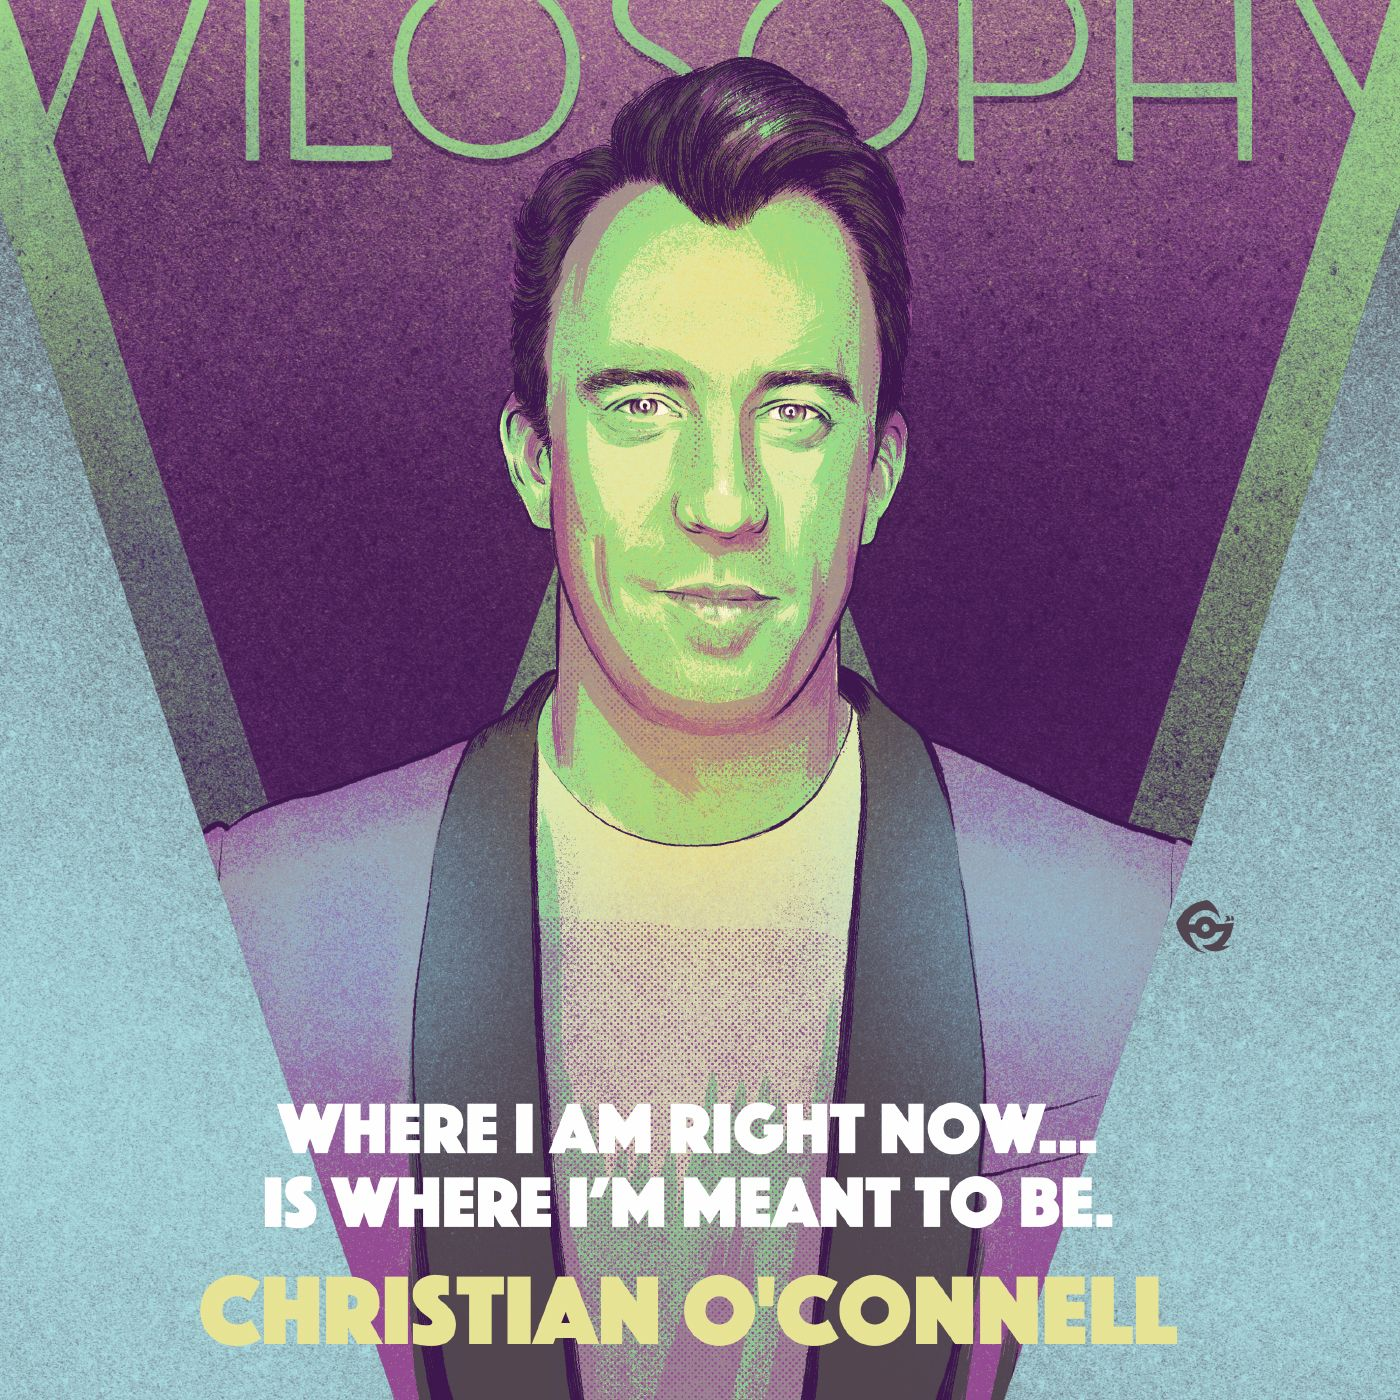 WILOSOPHY with Christian O’Connell (Part 2)